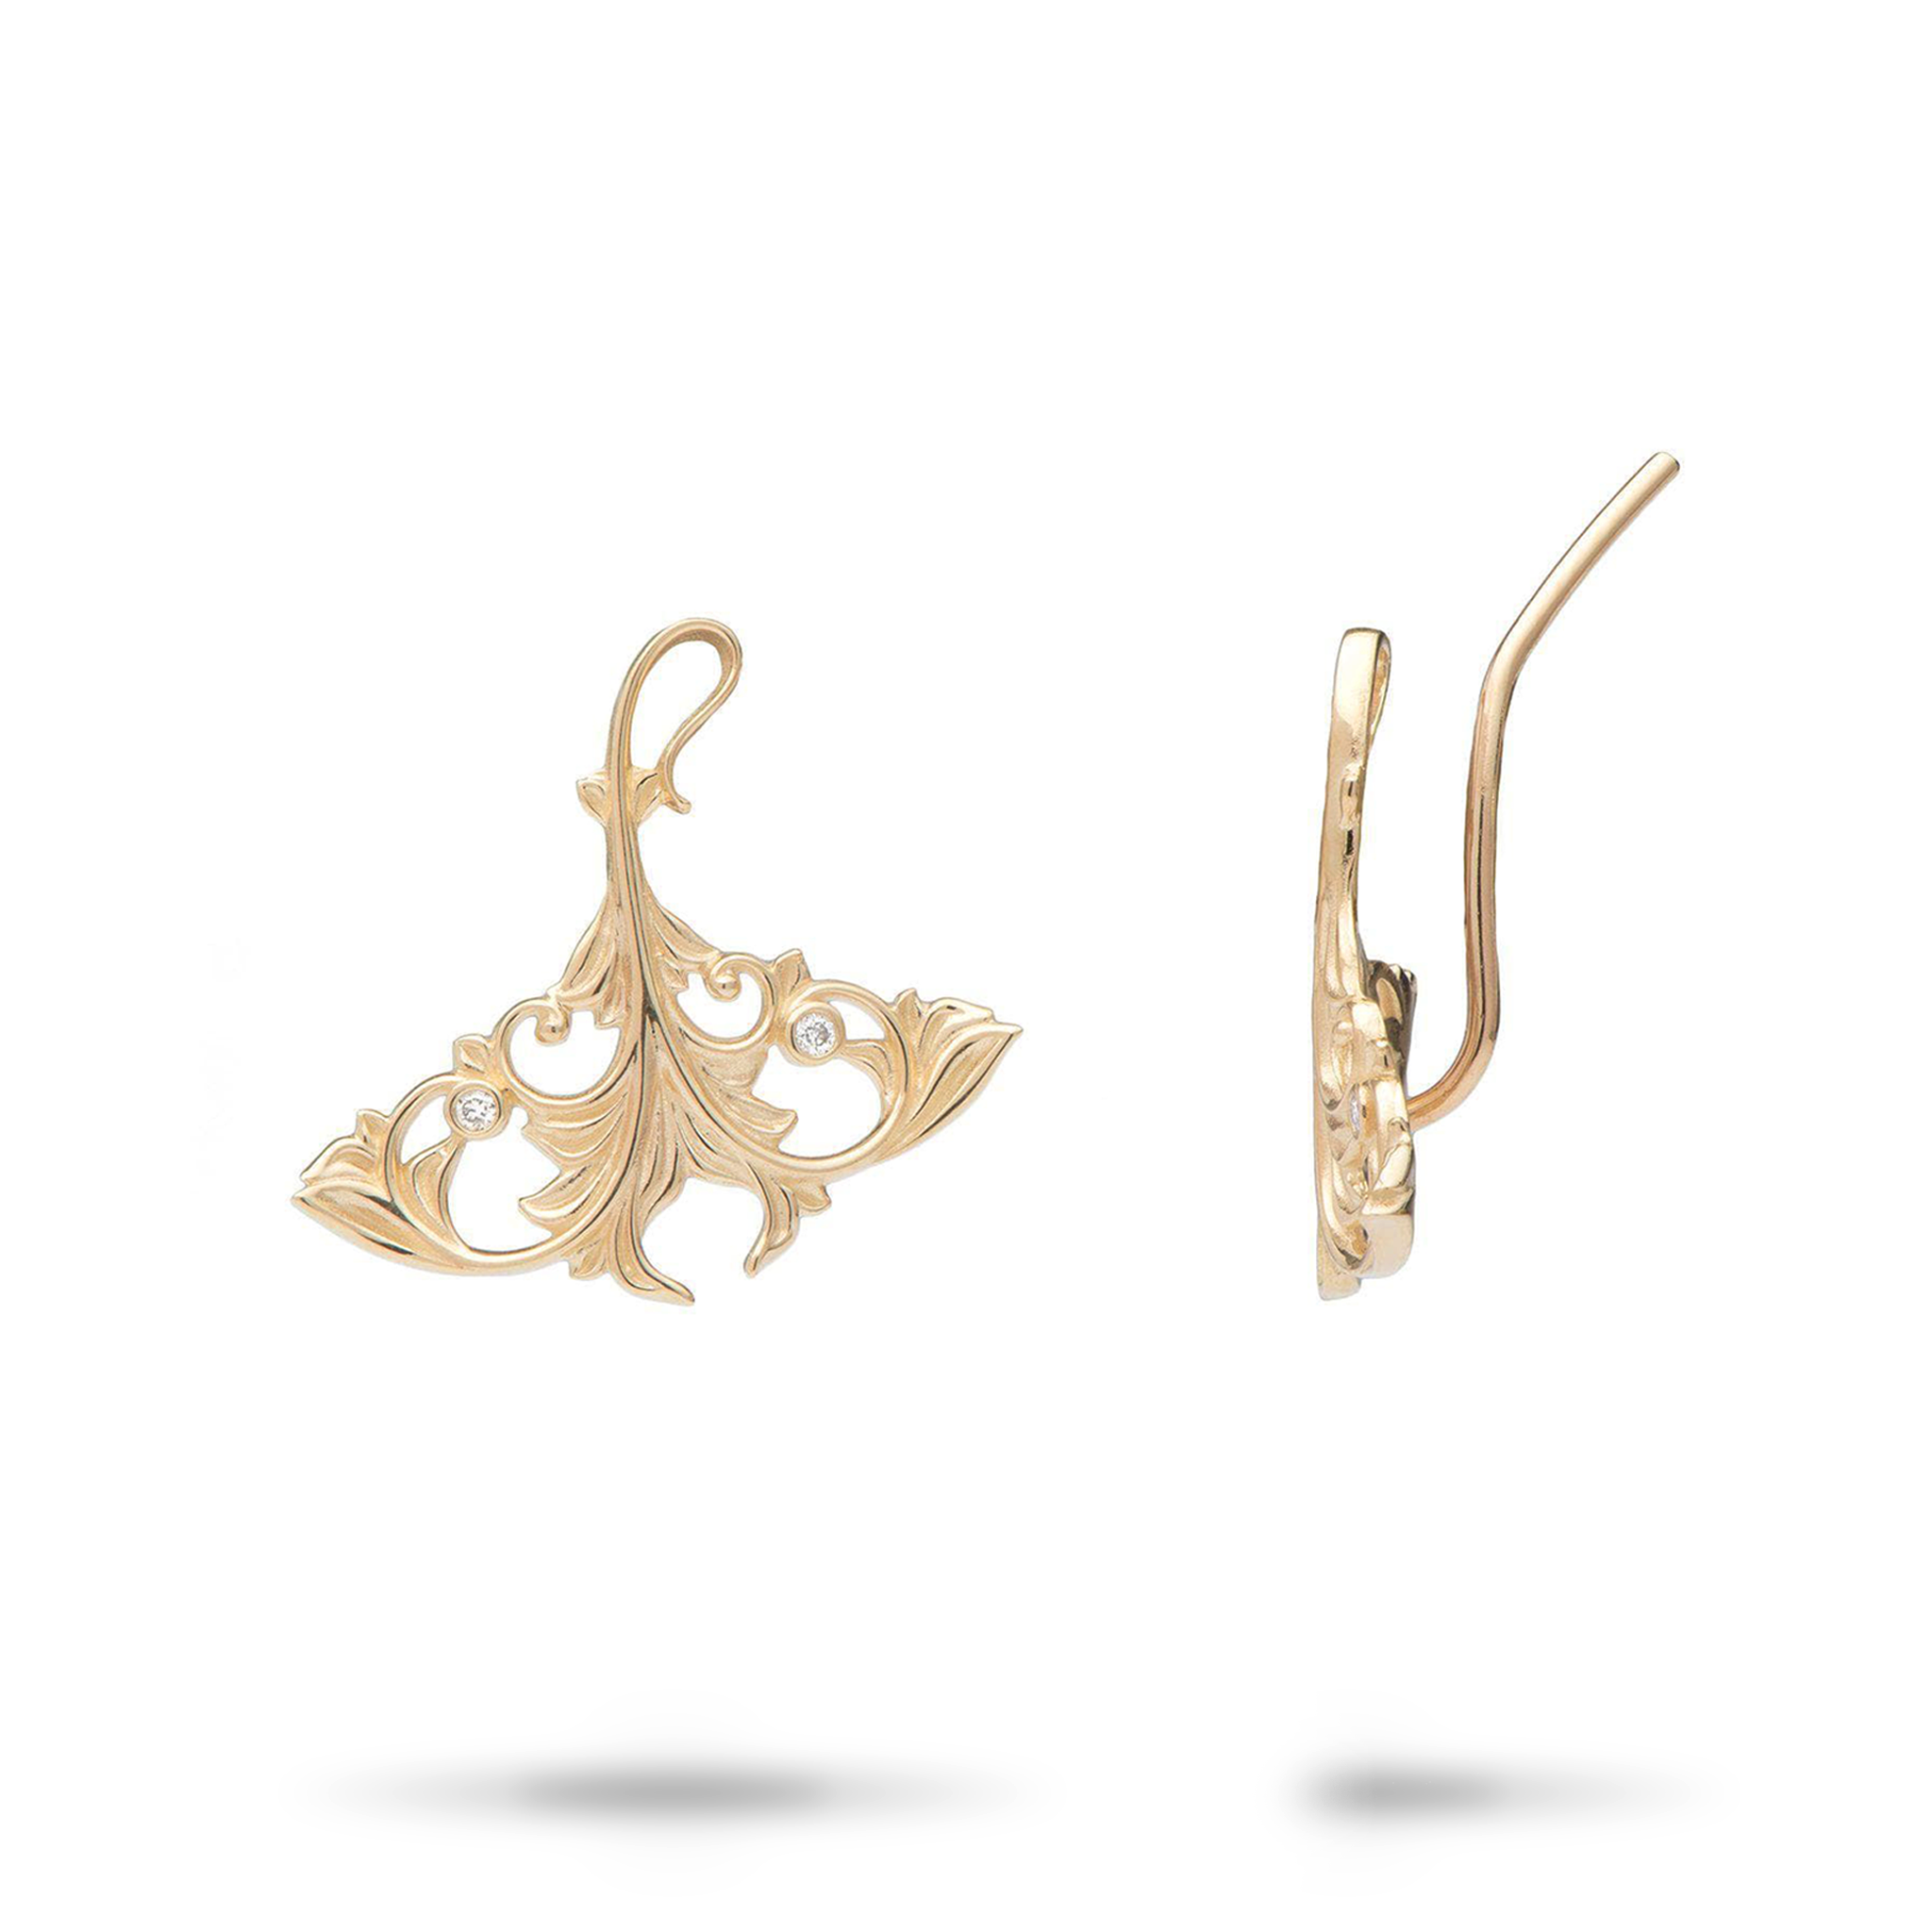 Living Heirloom Manta Ray Climber Earrings in Gold with Diamonds - 20mm